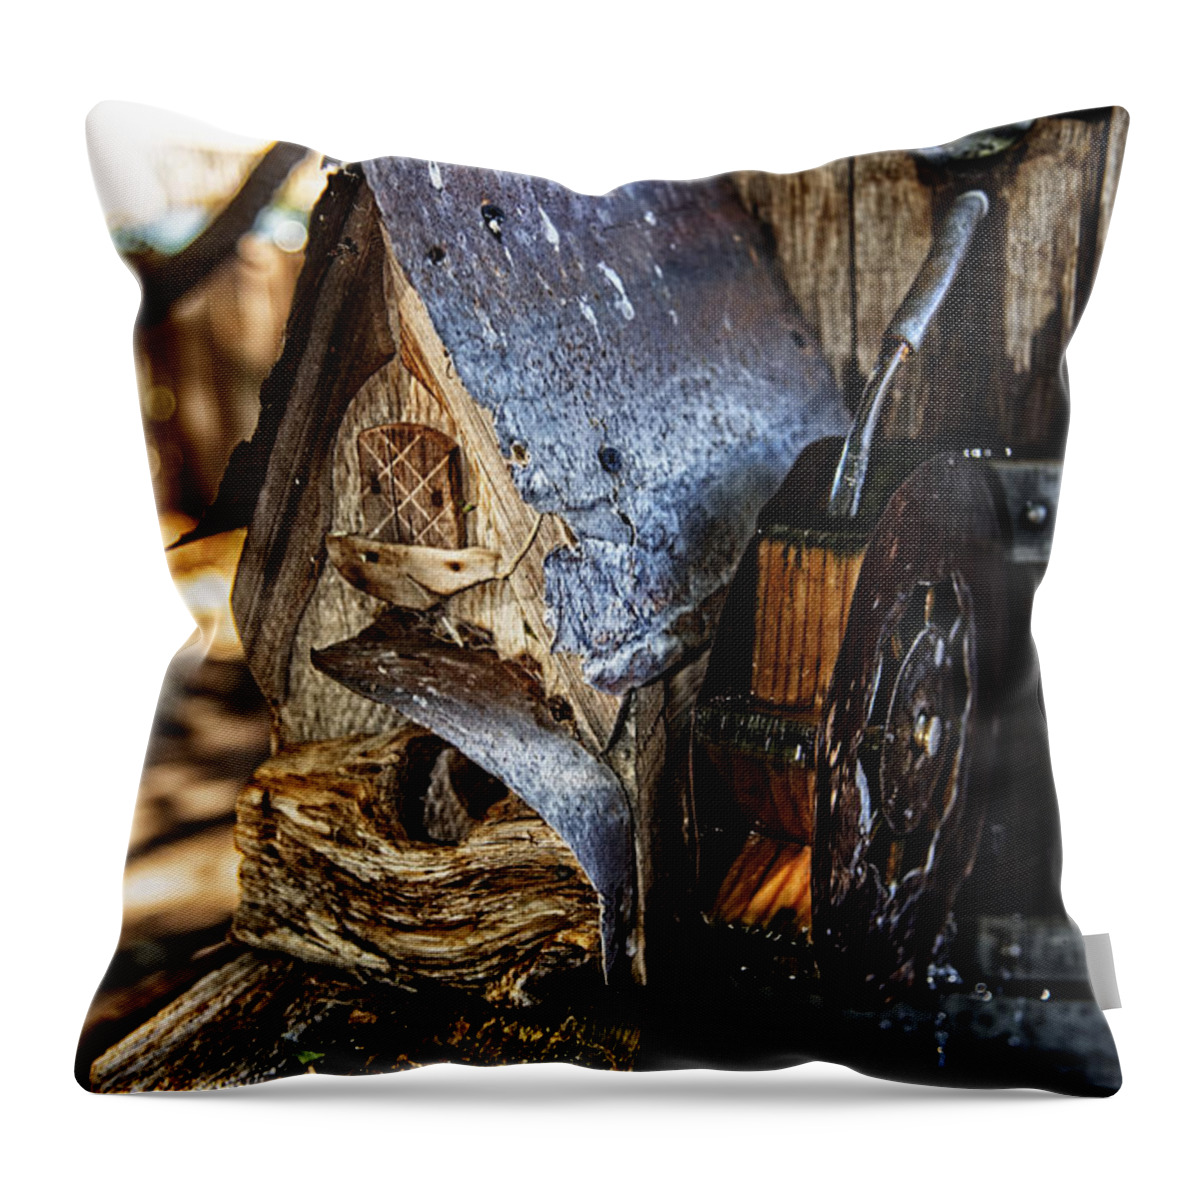 Rustic Throw Pillow featuring the photograph Com'on inY'all by Camille Lopez